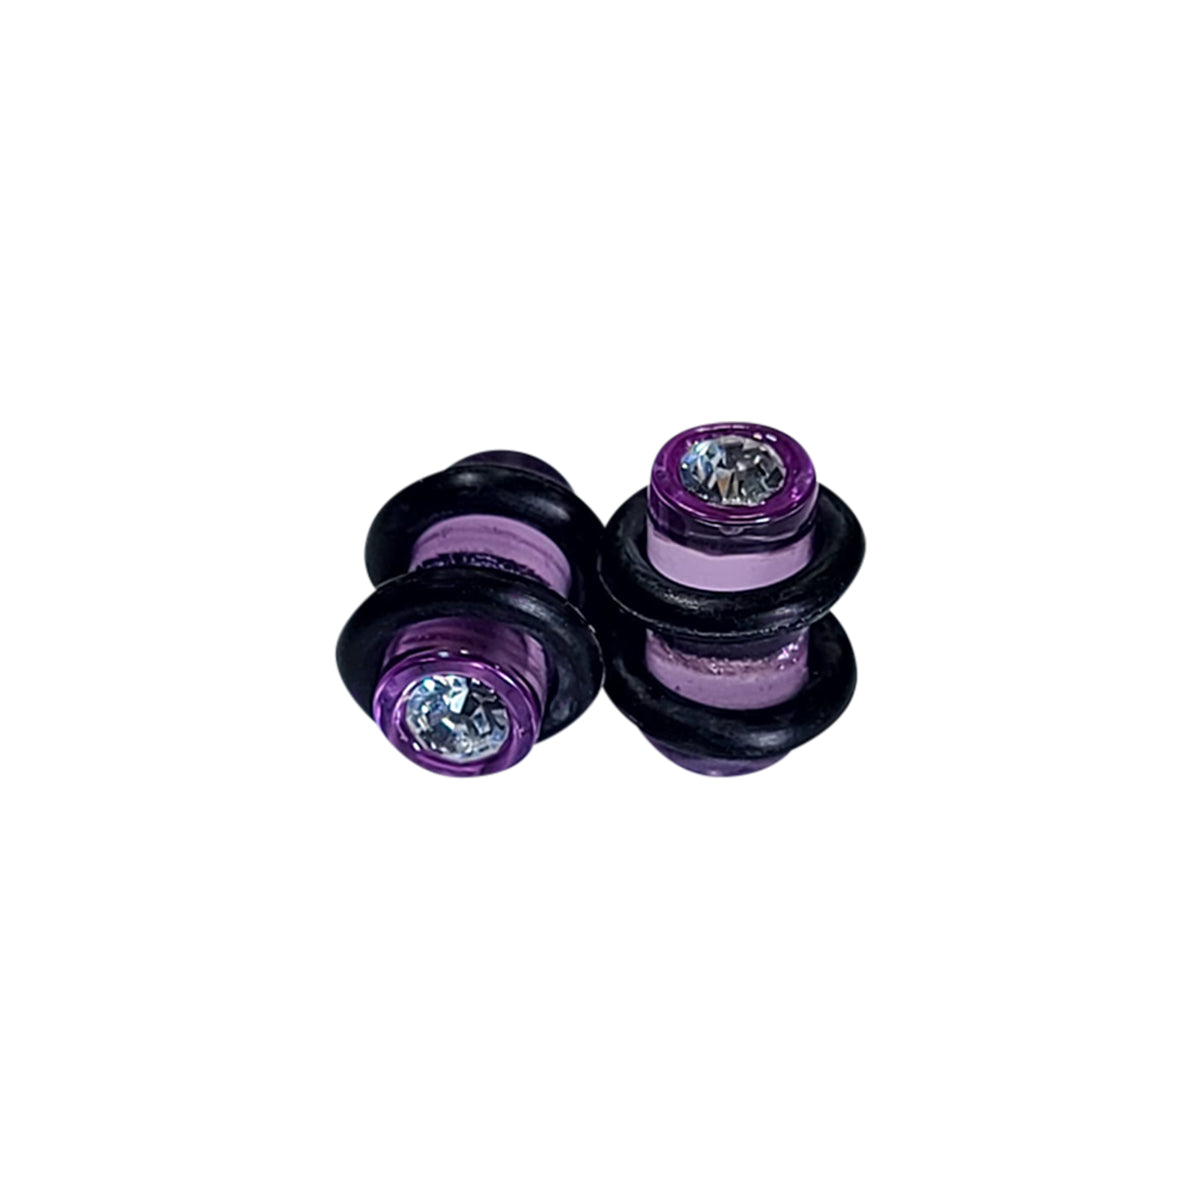 Pair of Acrylic CZ Gem Jeweled Oring Ear Plugs - 5 Colors Available